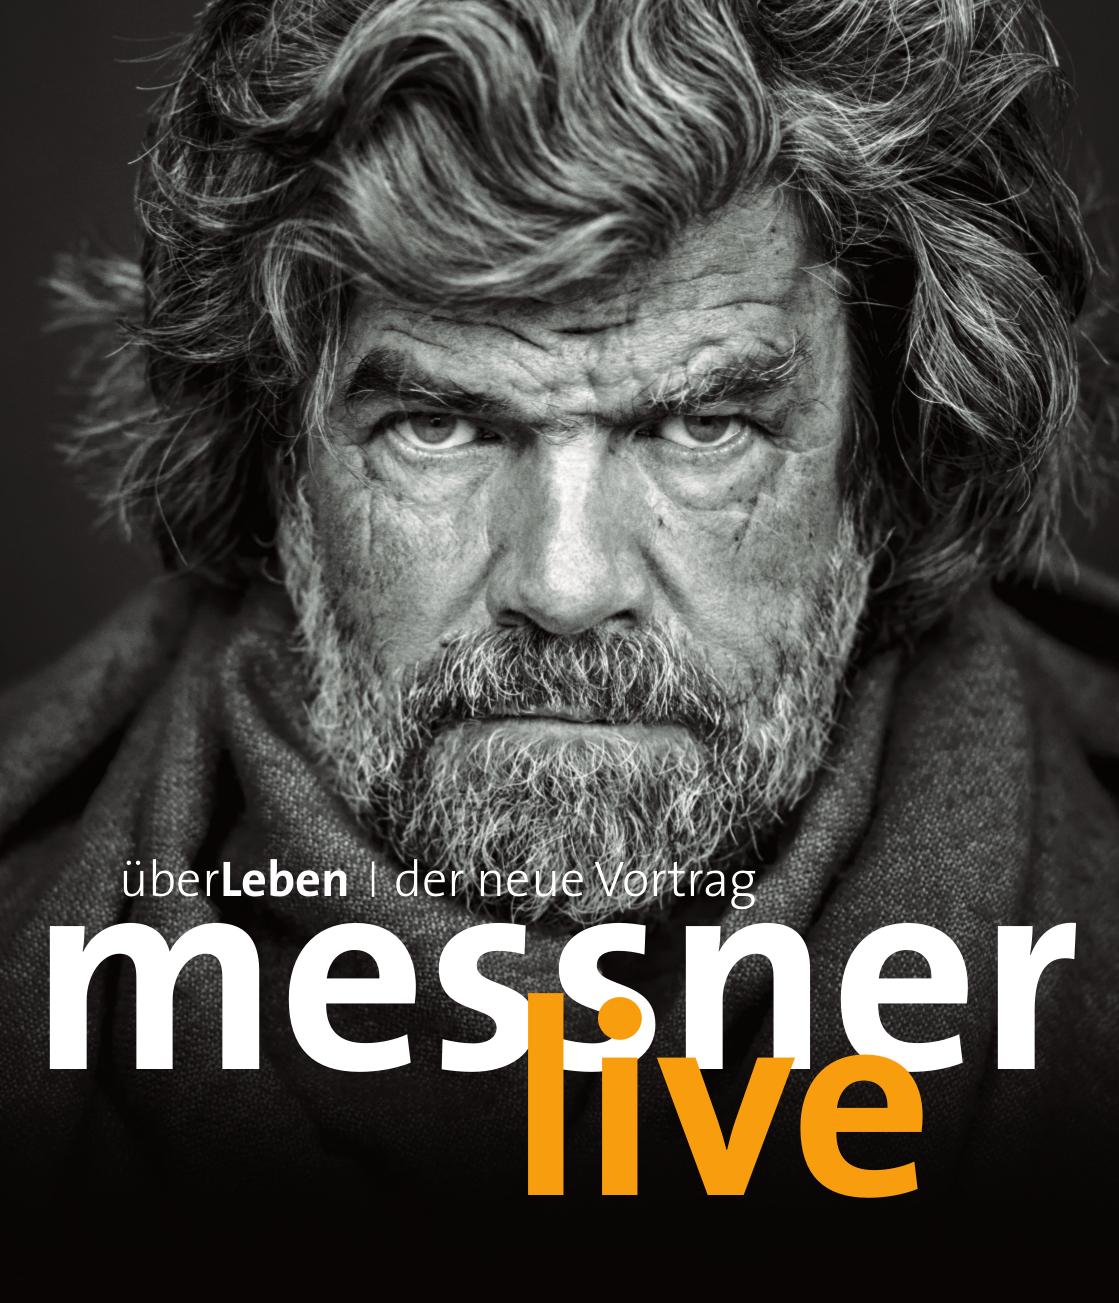 Messner c Andreas H Bitesnich